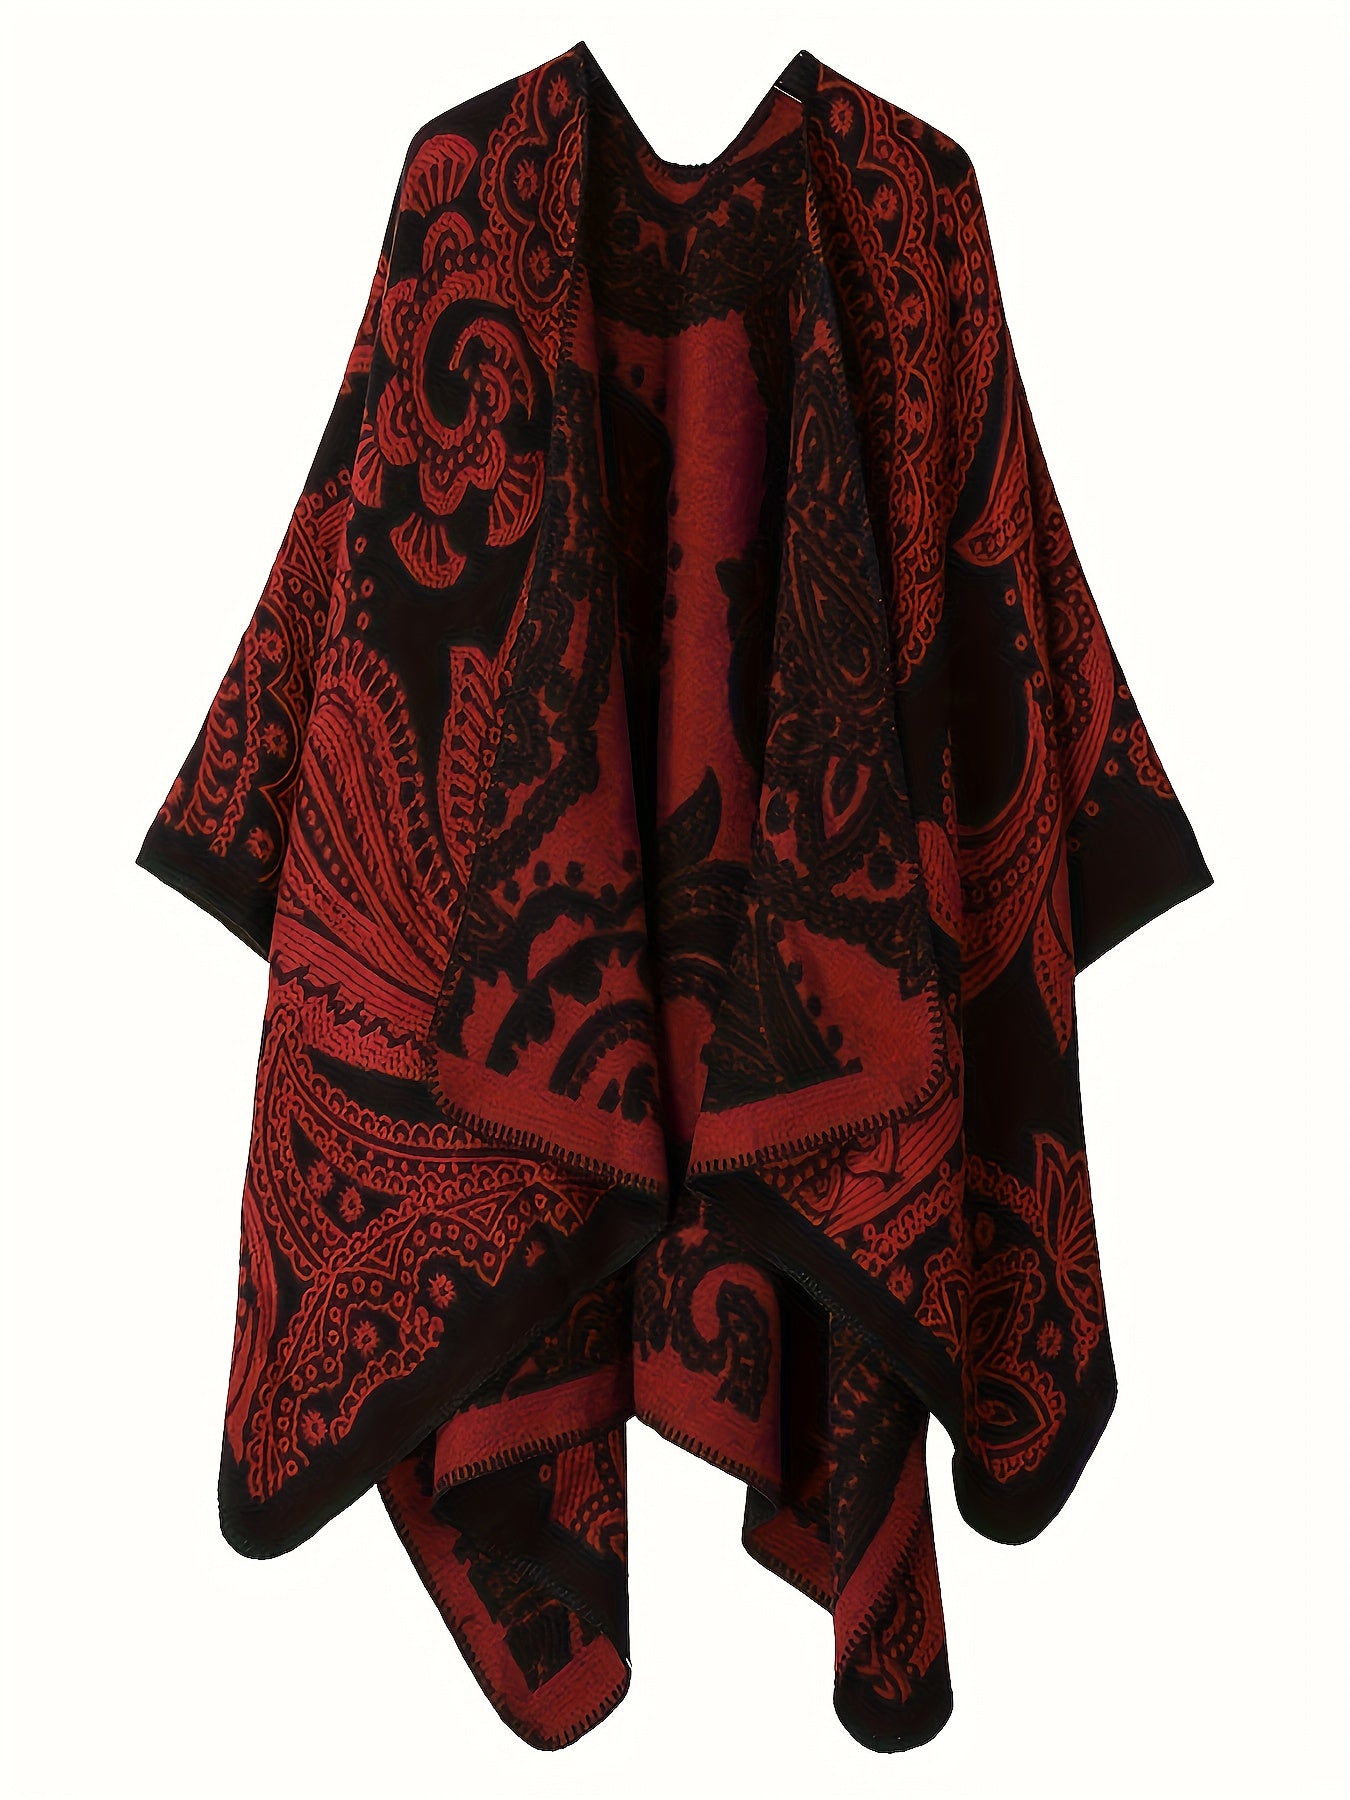 A Plus Size Ethnic Style Coat, Women's Plus Tribal Print Batwing Sleeve Open Front Waterfall Collar Shawl Cape Coat by Maramalive™, made of soft polyester with intricate designs, drapes over an invisible hanger against a white background, perfect for adding a touch of elegance to your Fall/Winter wardrobe.